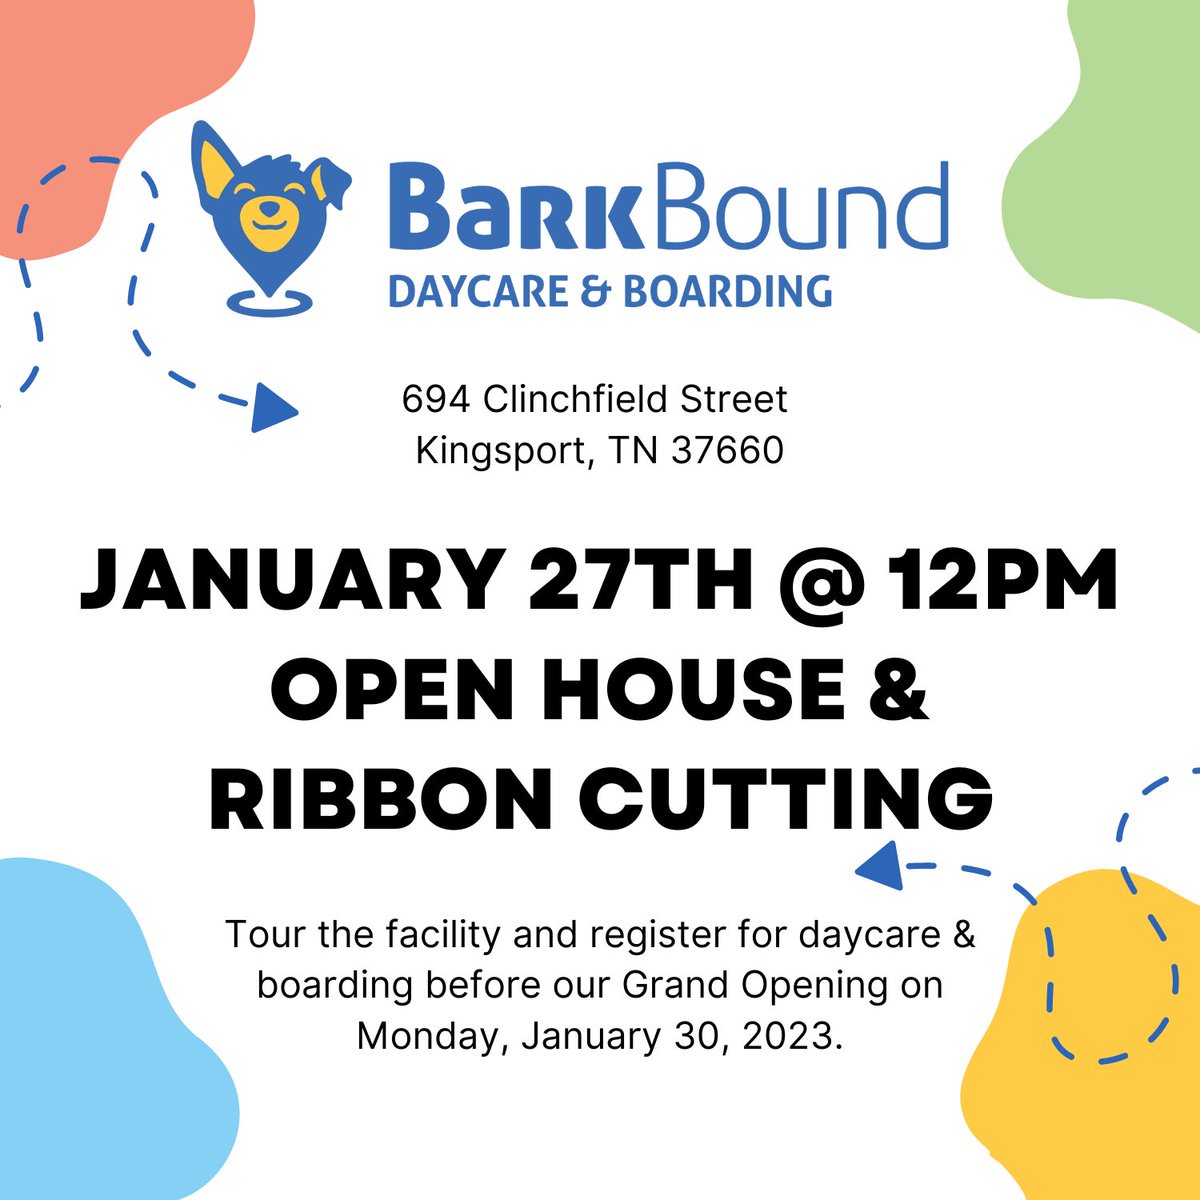 Join us and Downtown Kingsport Association for an open house and ribbon cutting celebration for BarkBound Daycare & Boarding on Friday, January 27 at 12:00 p.m. They're located at 694 Clinchfield Street in Kingsport. Visit their website barkbound.com to learn more.